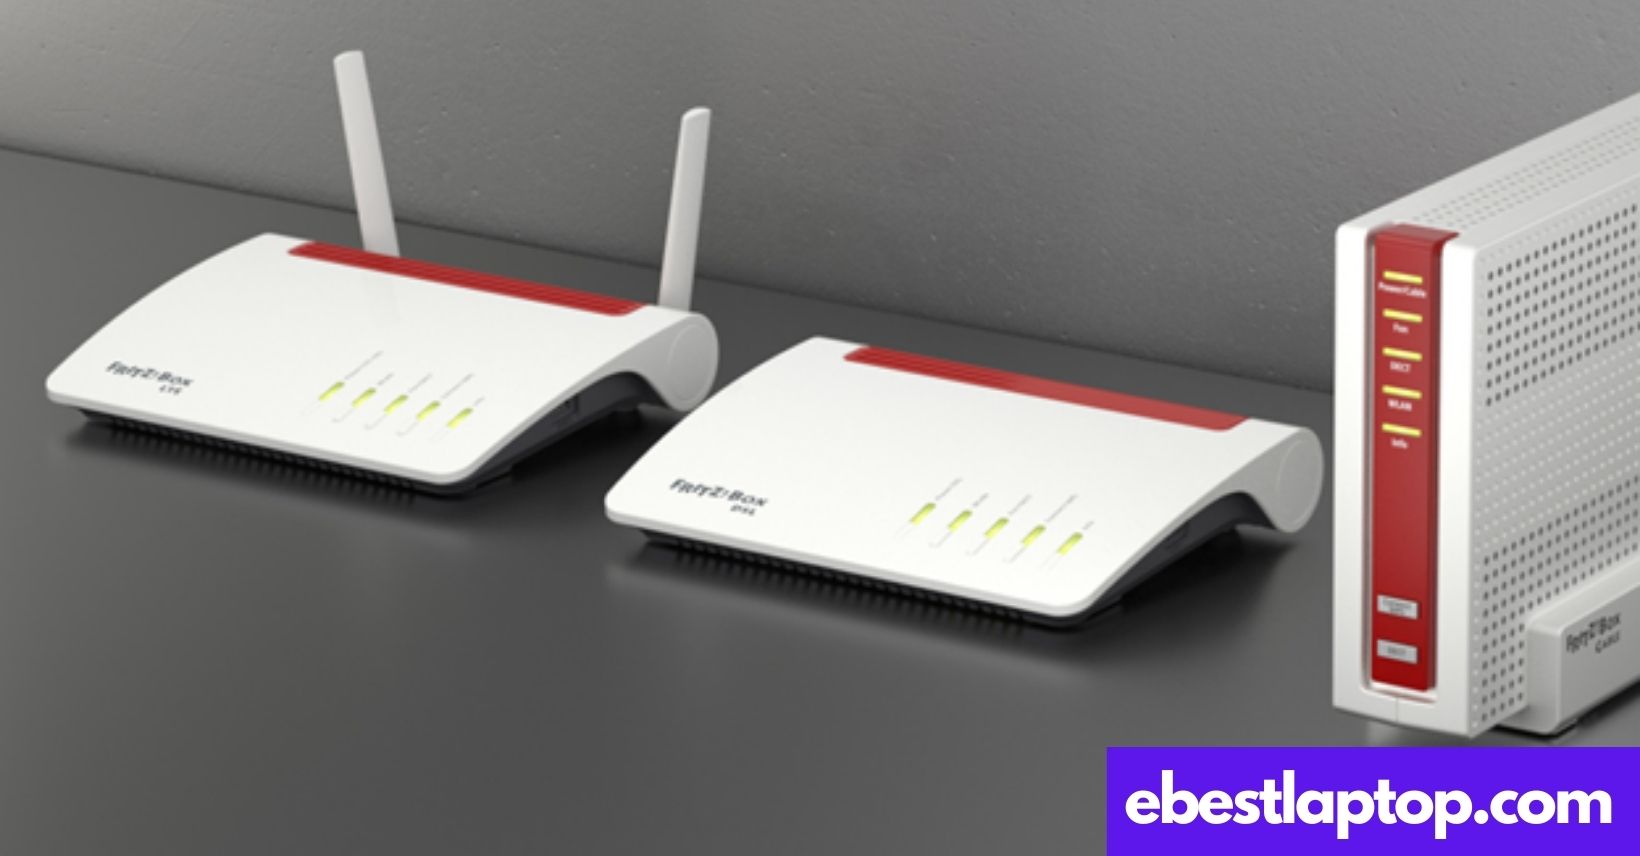 Fritzbox WiFi router